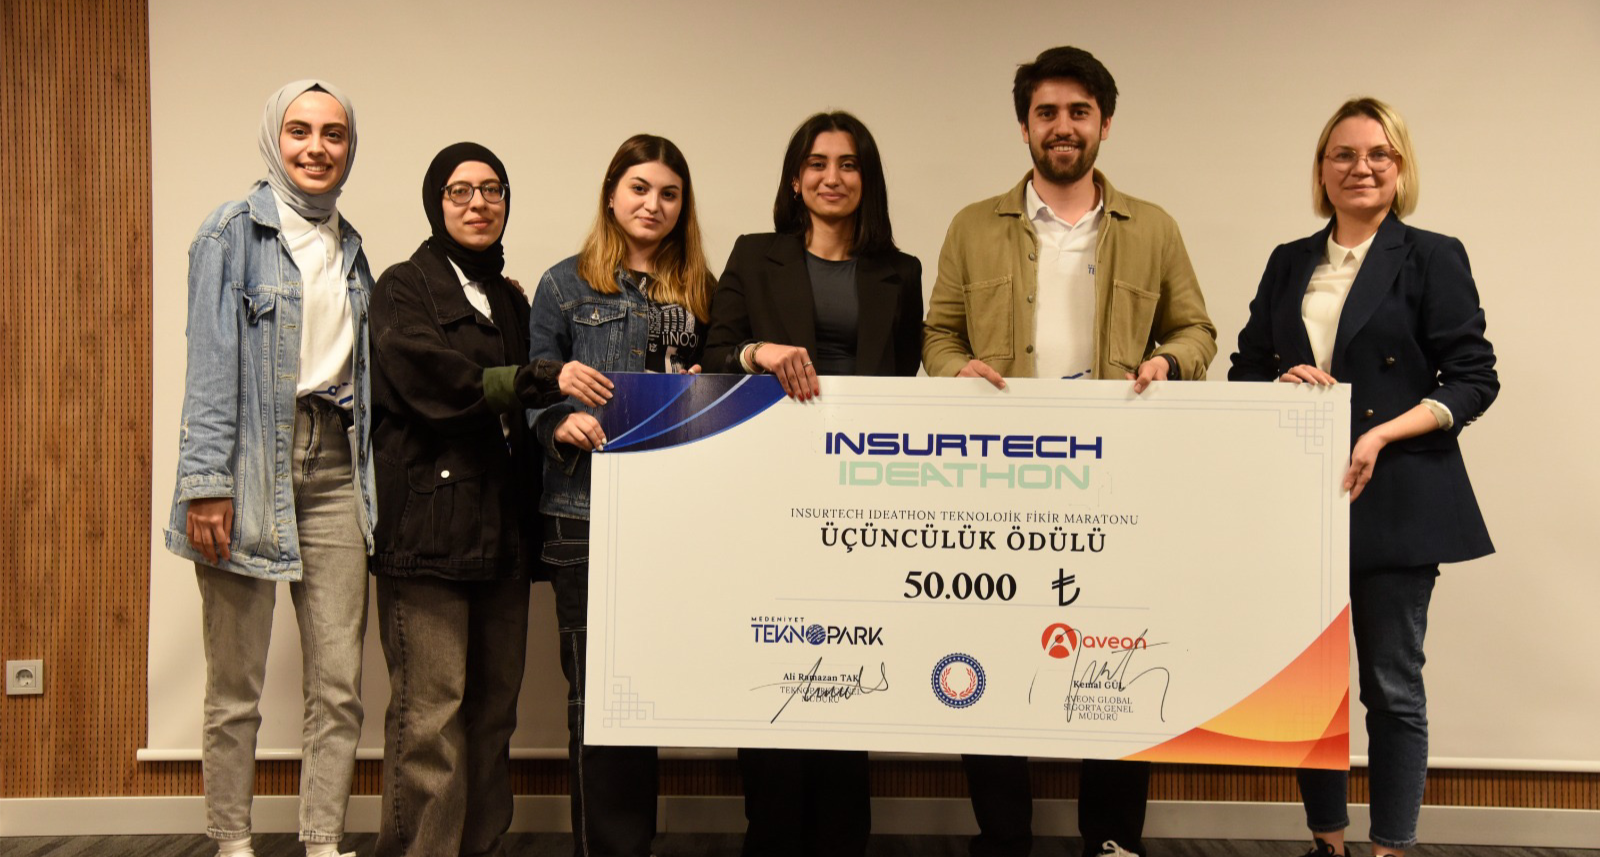 Computer and Industrial Engineering Students Excel in the Insurtech Ideathon: Securing Third Place Victory